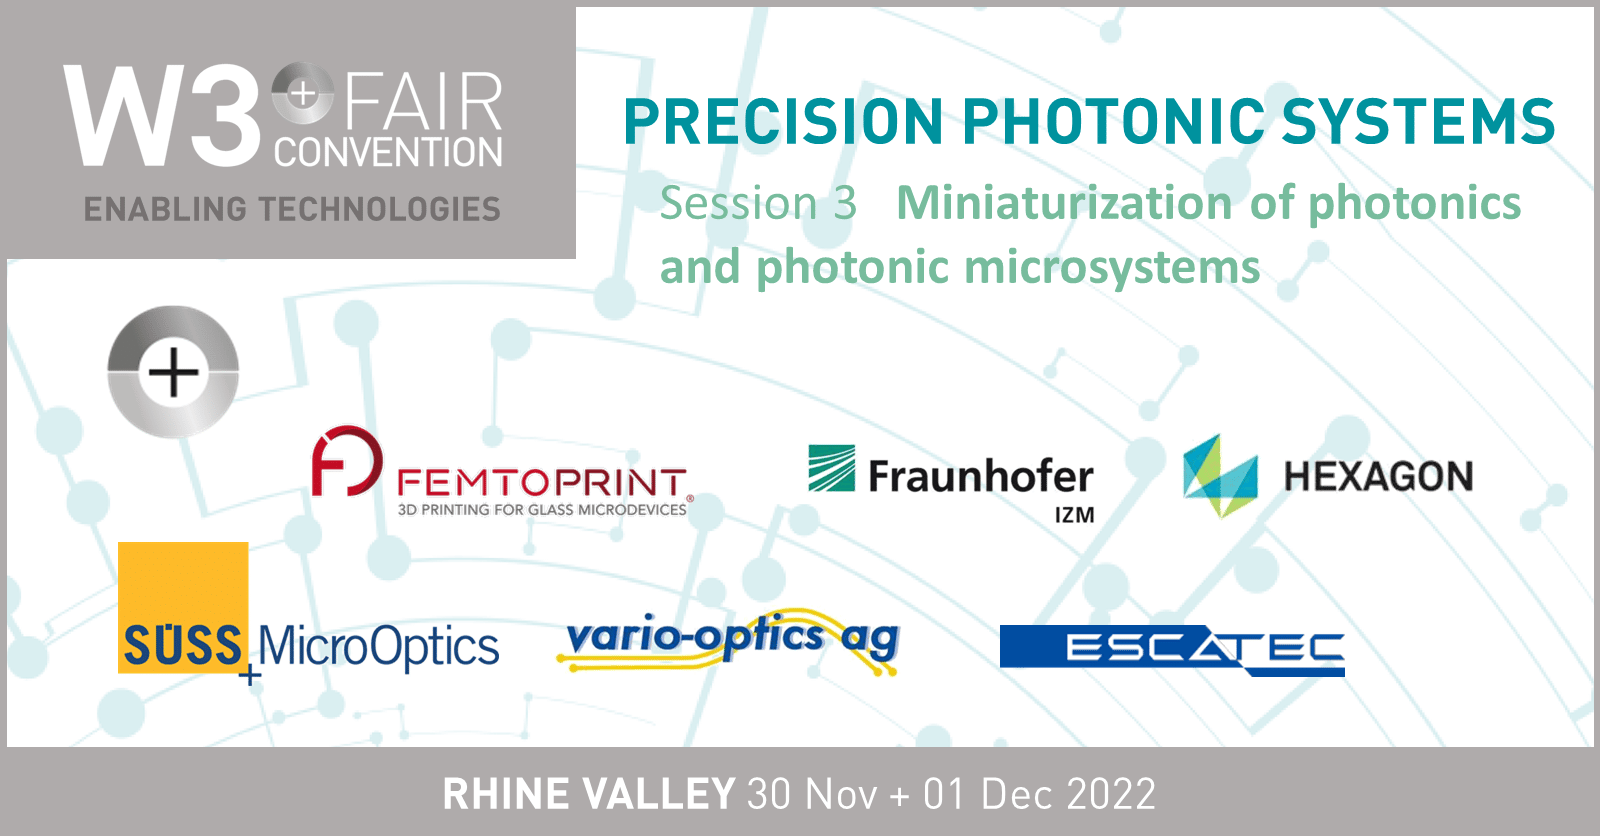 Precision Photonic Systems at W3+ Fair Rhine Valley 2022